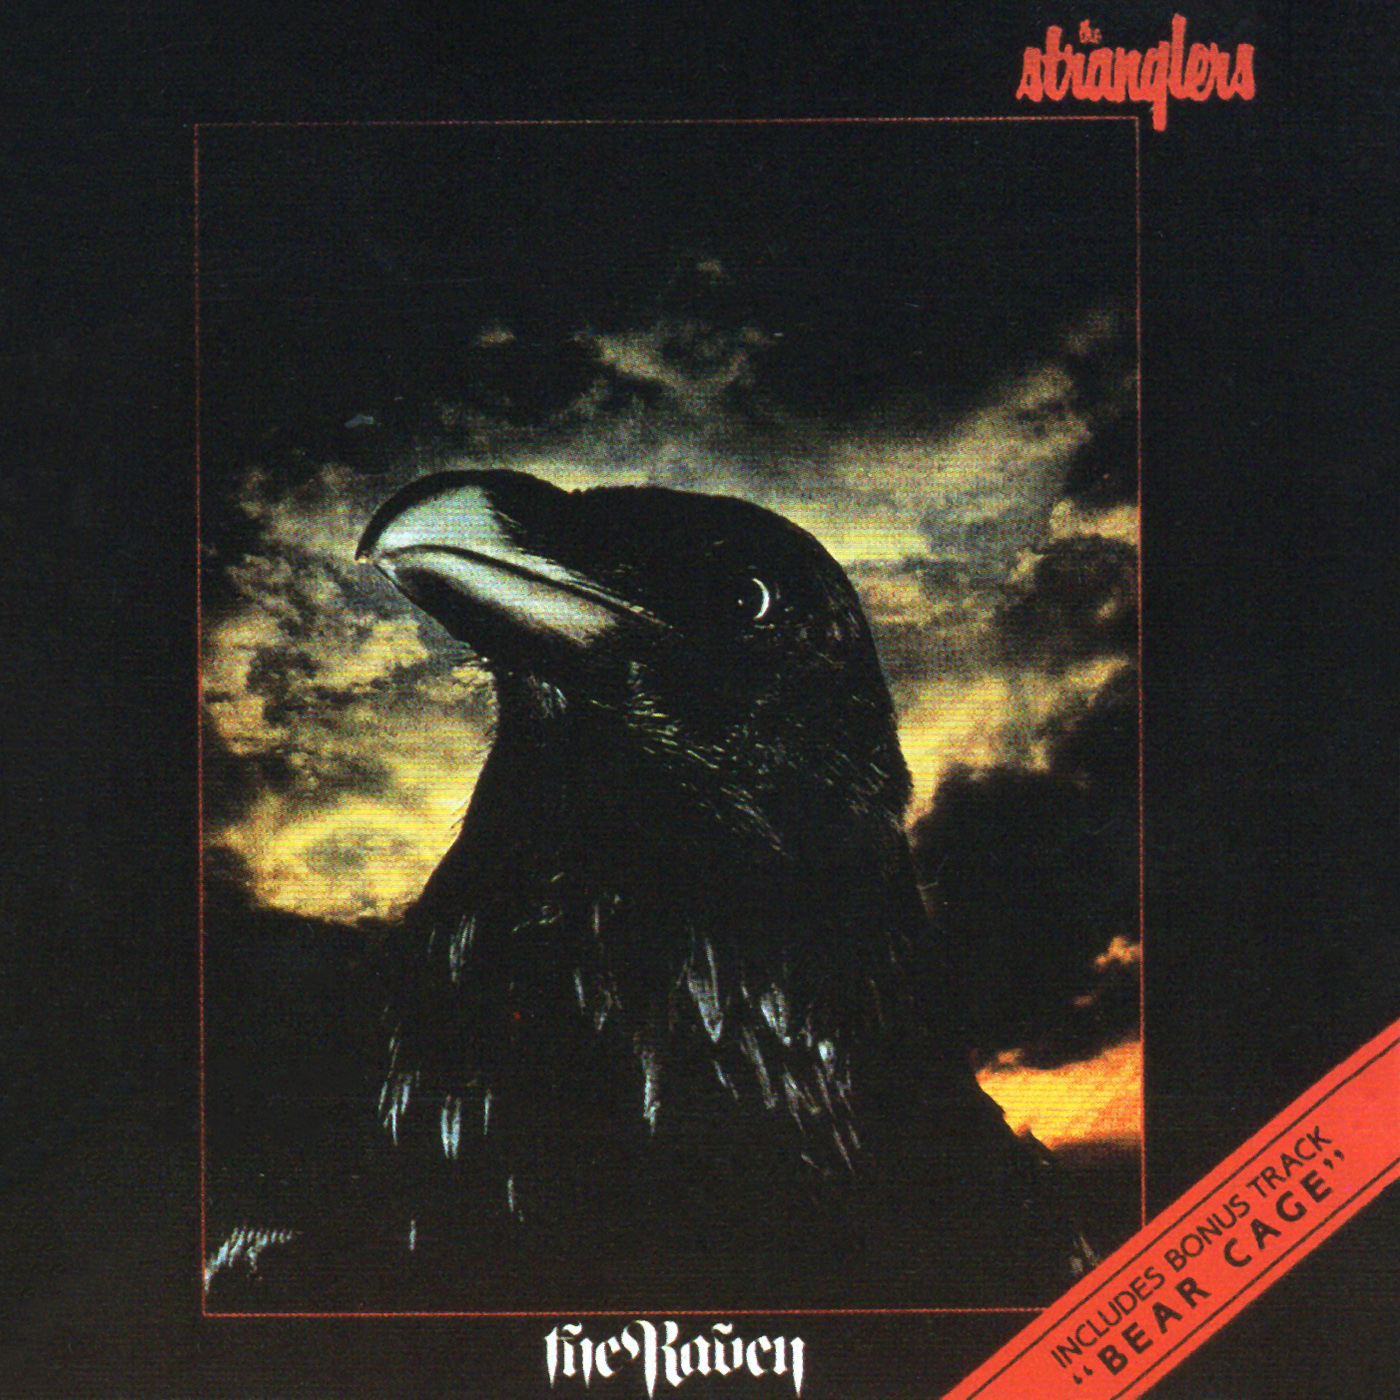 The Stranglers-1979-The Raven [CDP 7 46615 2]